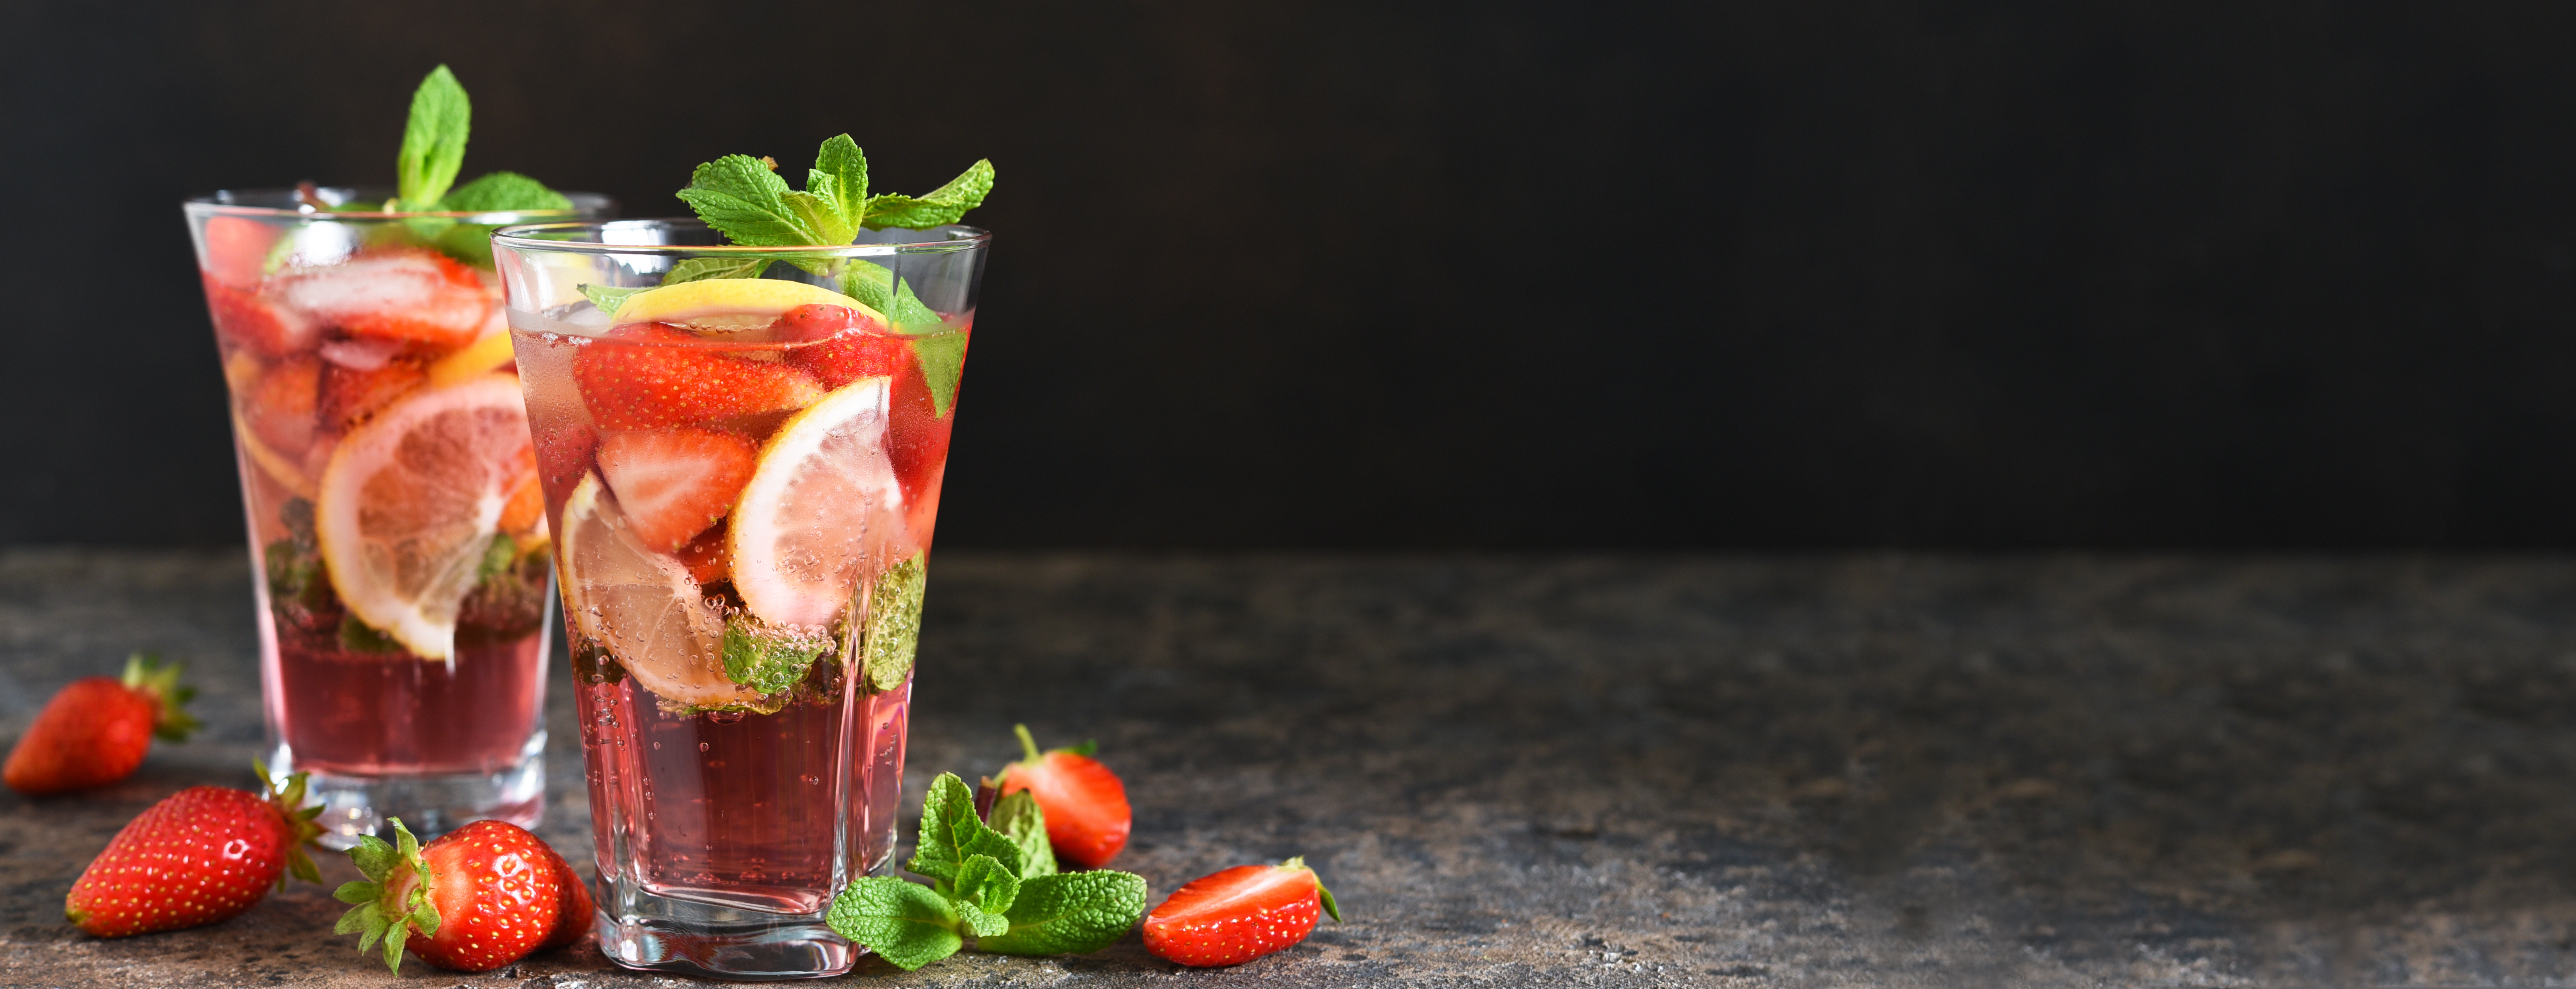 Lemonade with strawberries and mint on a dark concrete background. Summer cold drink.